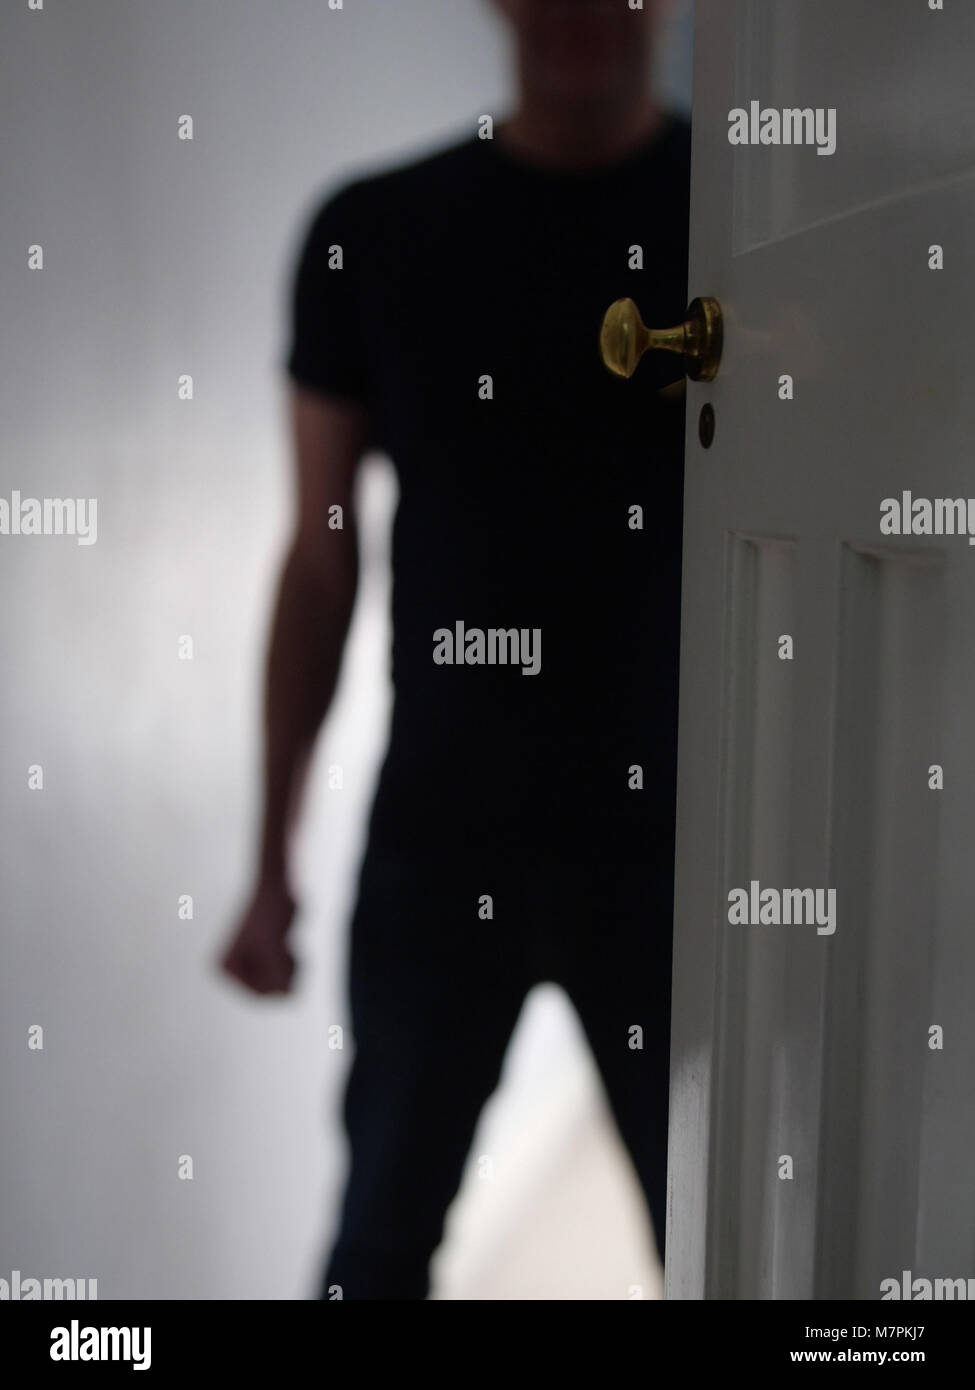 Threatening man in doorway at home with a clenched fist. Domestic violence. Stock Photo